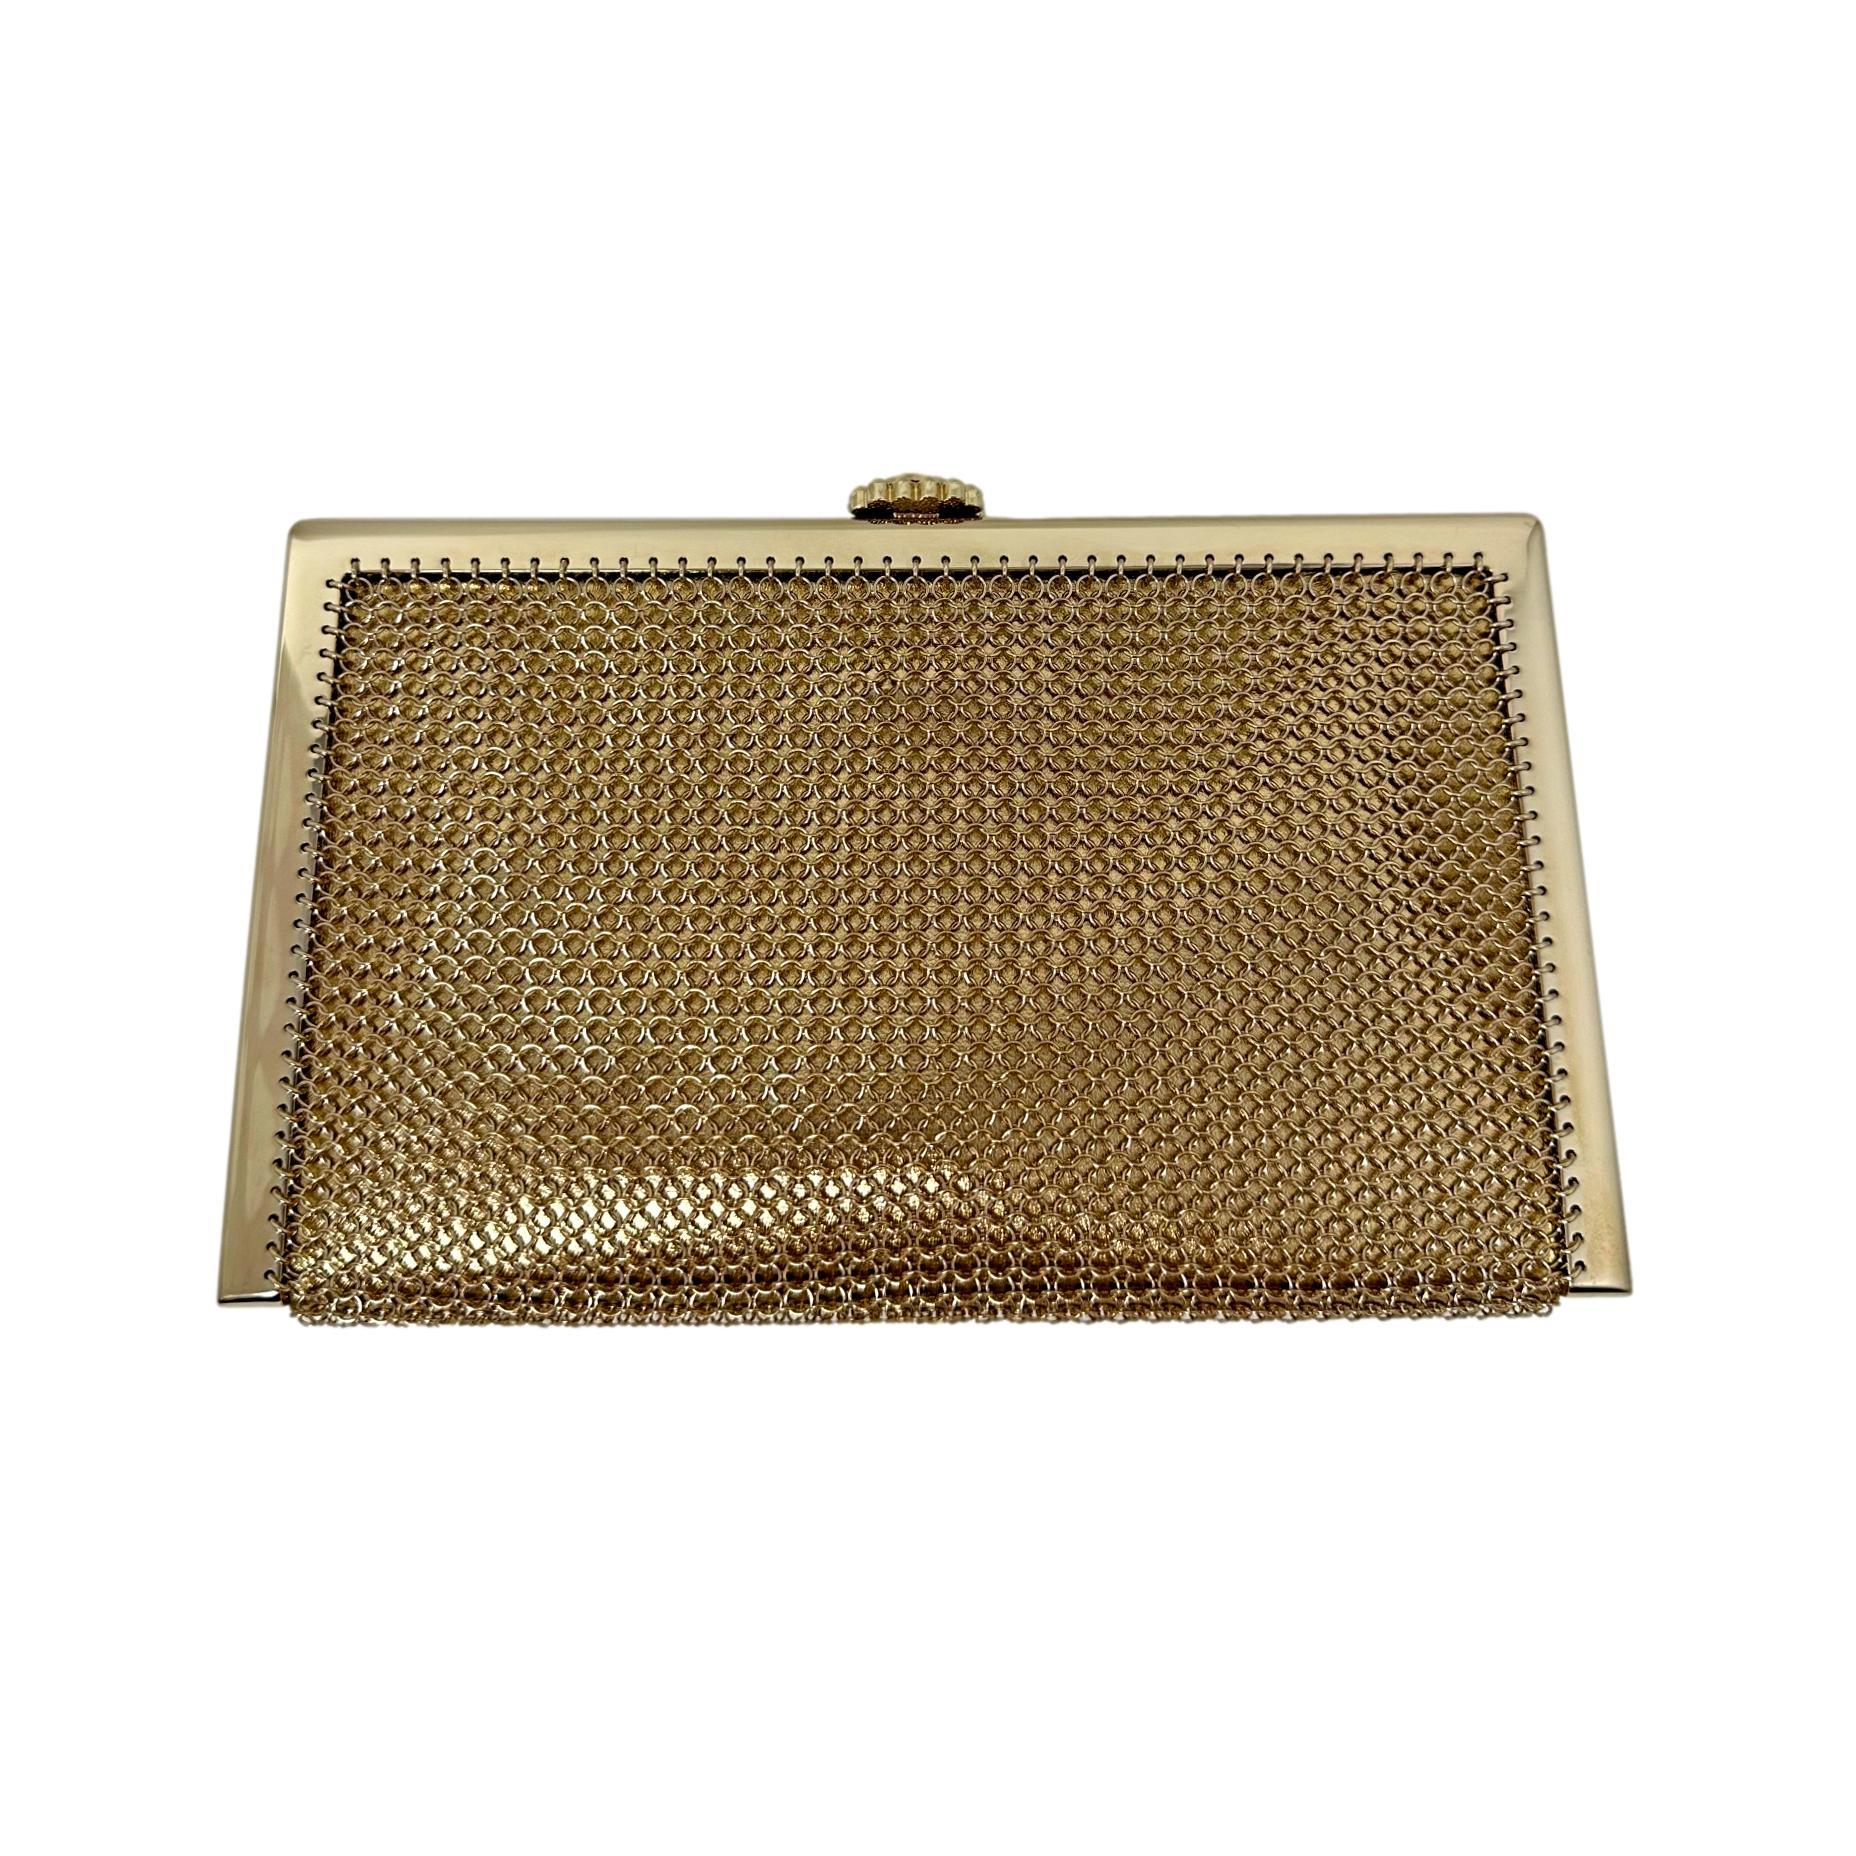 Description: This is a gorgeous Chanel 22A Gold Mesh Chainmail Logo CC Crystal & Enamel Charm Clutch from the 2022 Fall Collection. This stunning bag is covered in incredibly detailed logo charms like a Gold Lion, Faux Pearl detailed Logos, Stars,